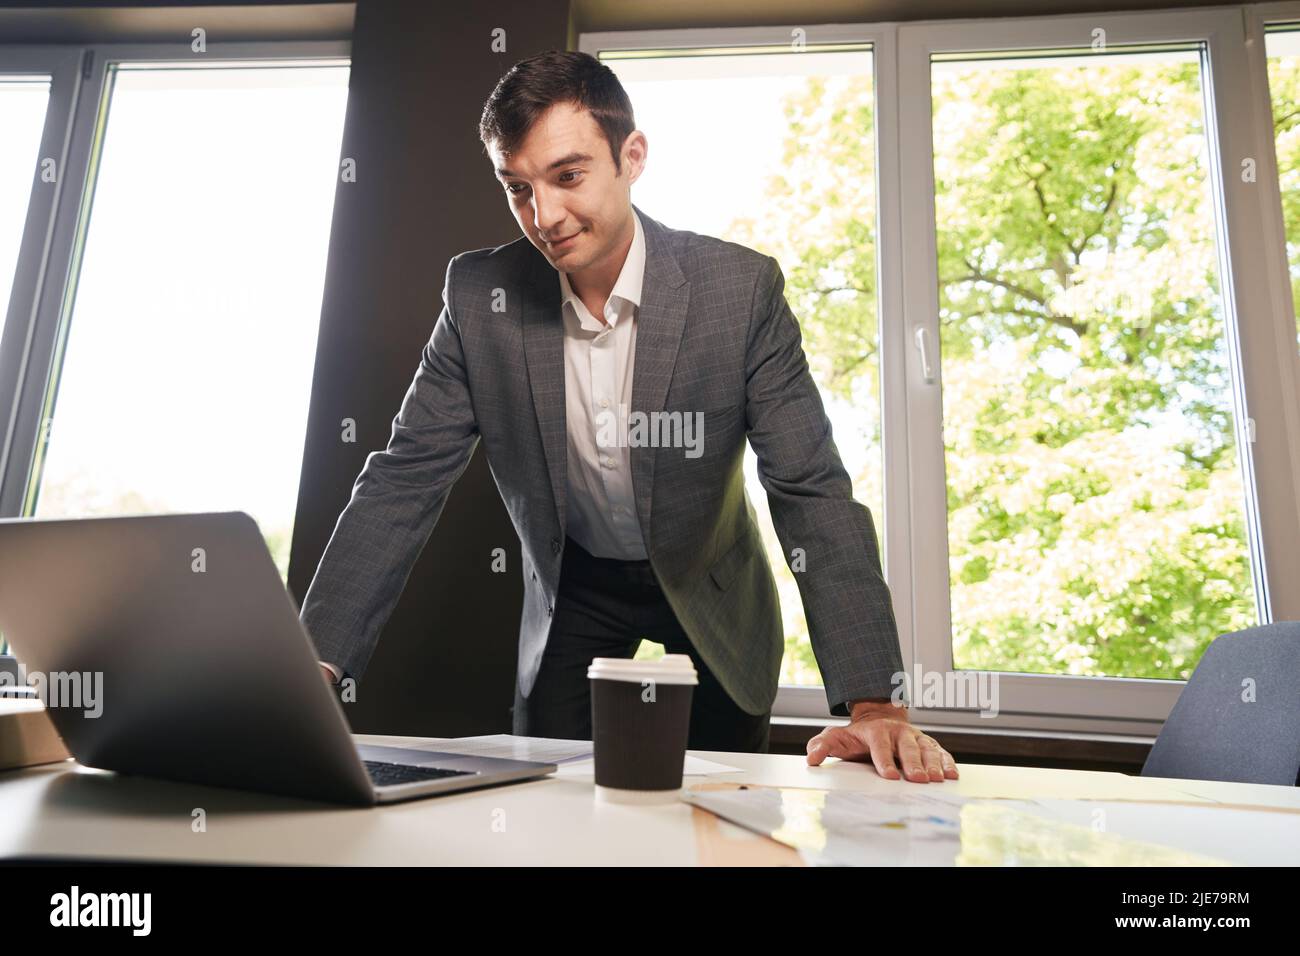 Young clerical worker bending over laptop on table Stock Photo